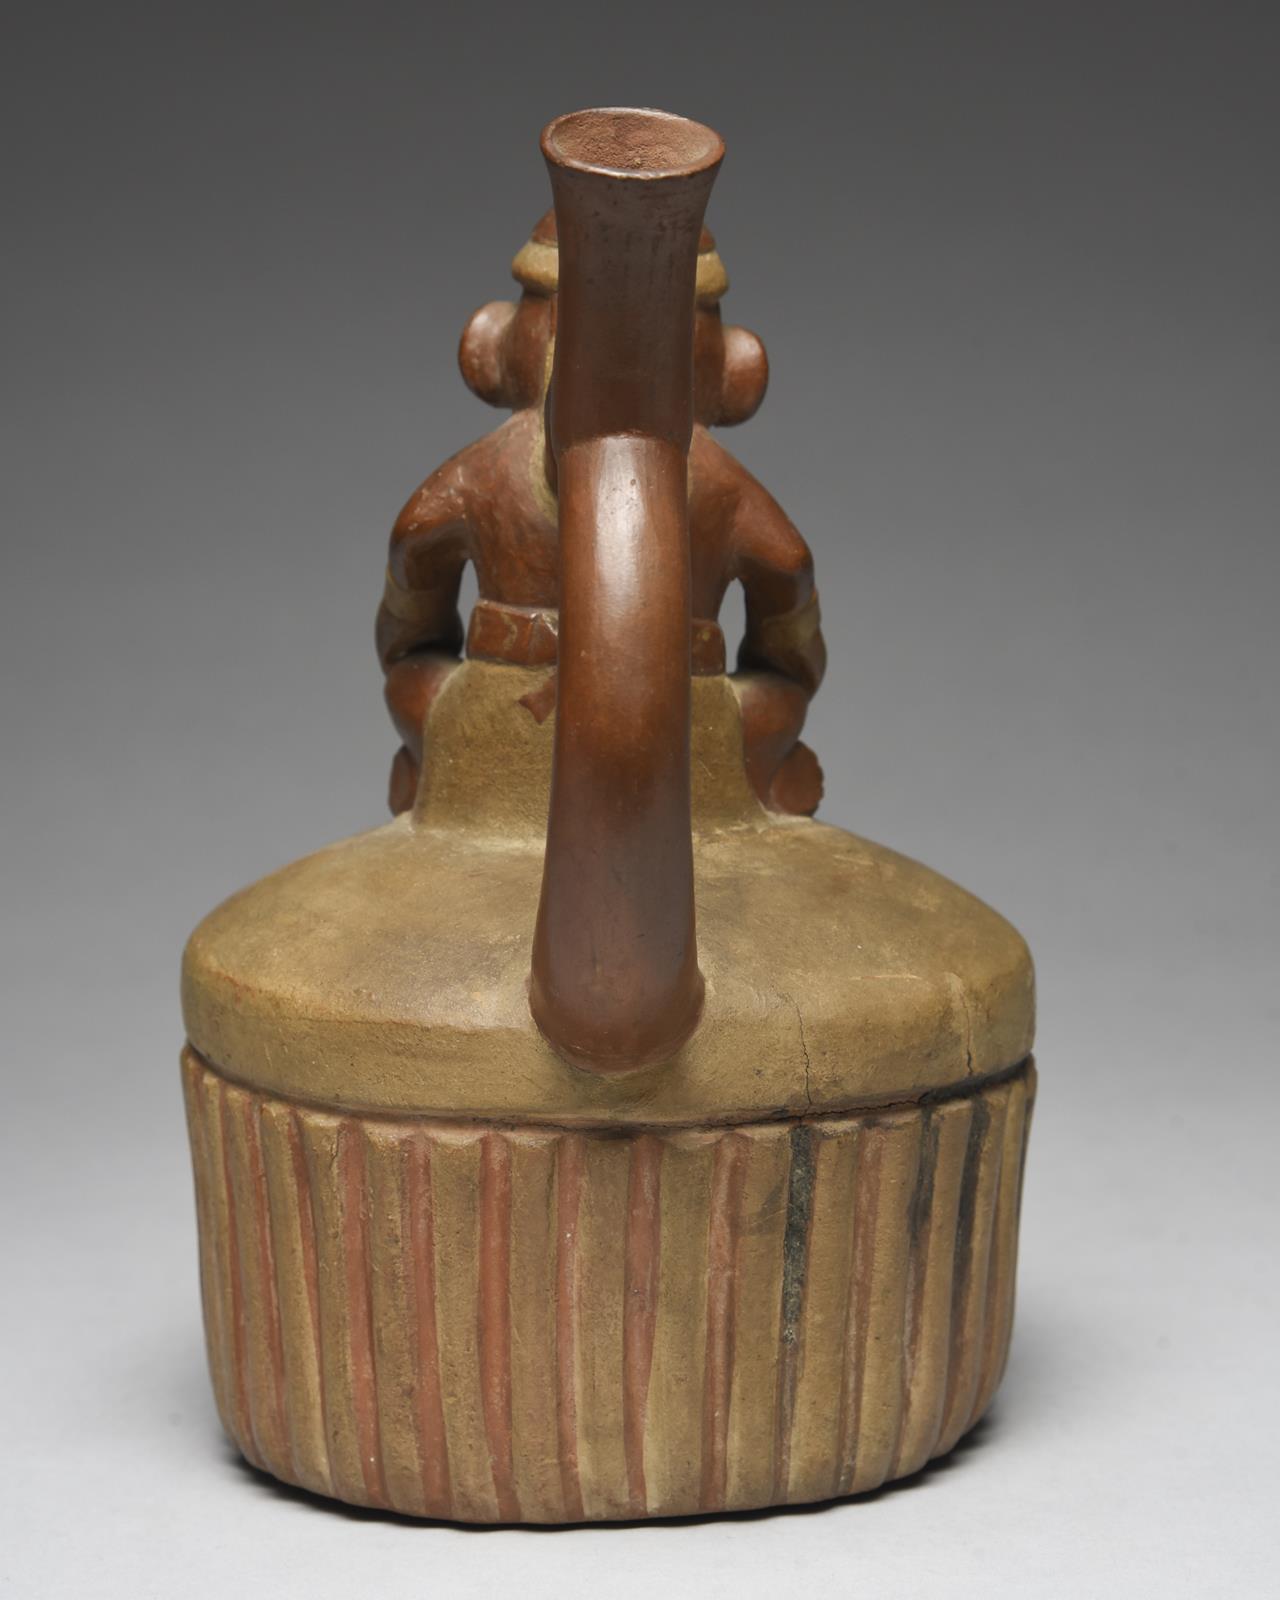 A Moche stirrup spout vessel Peru, circa 400 - 700 AD of circular ribbed form with a domed top - Image 5 of 5